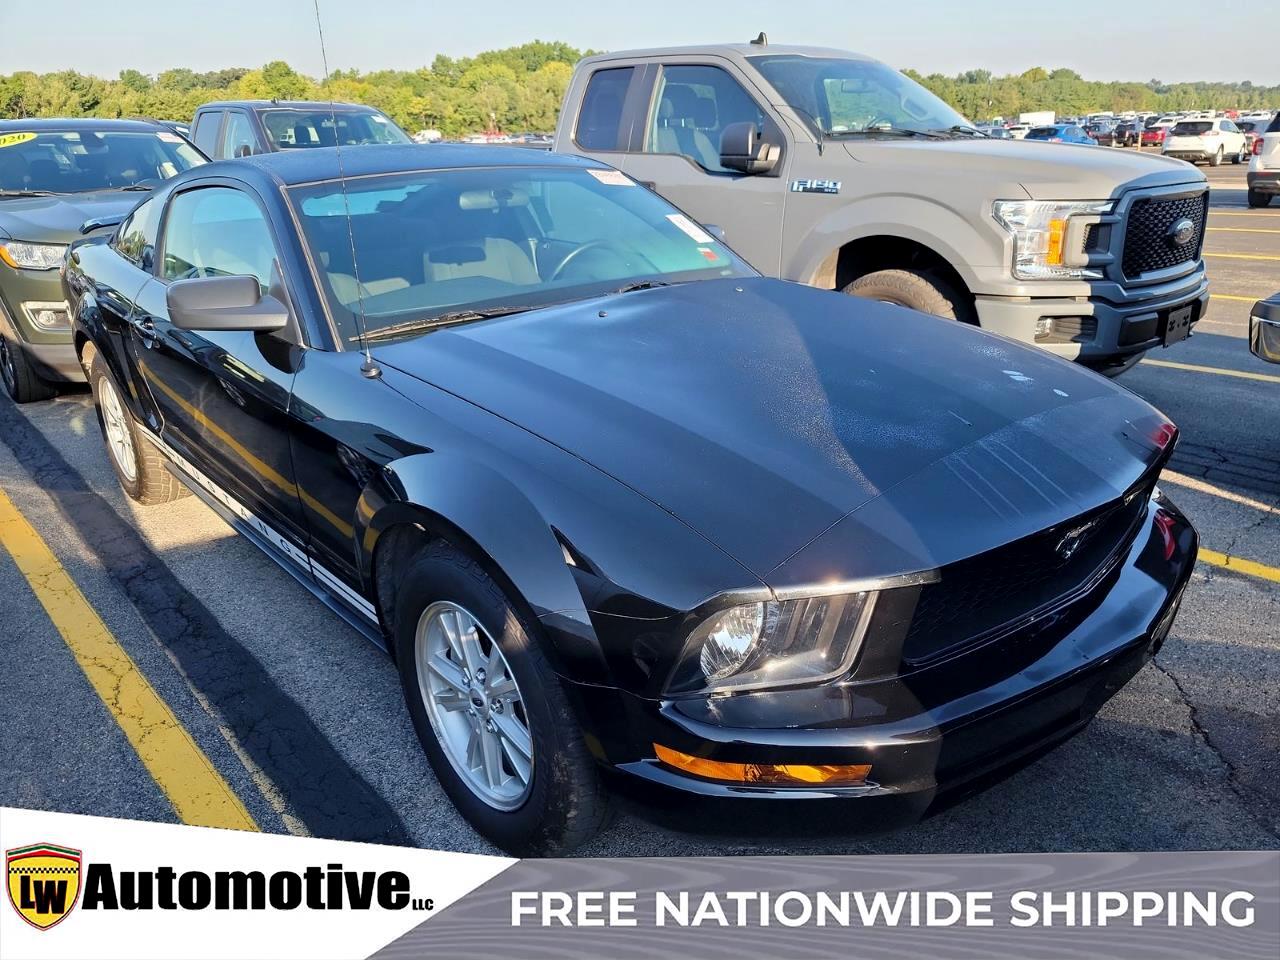 2006 Ford Mustang 2dr Cpe Standard